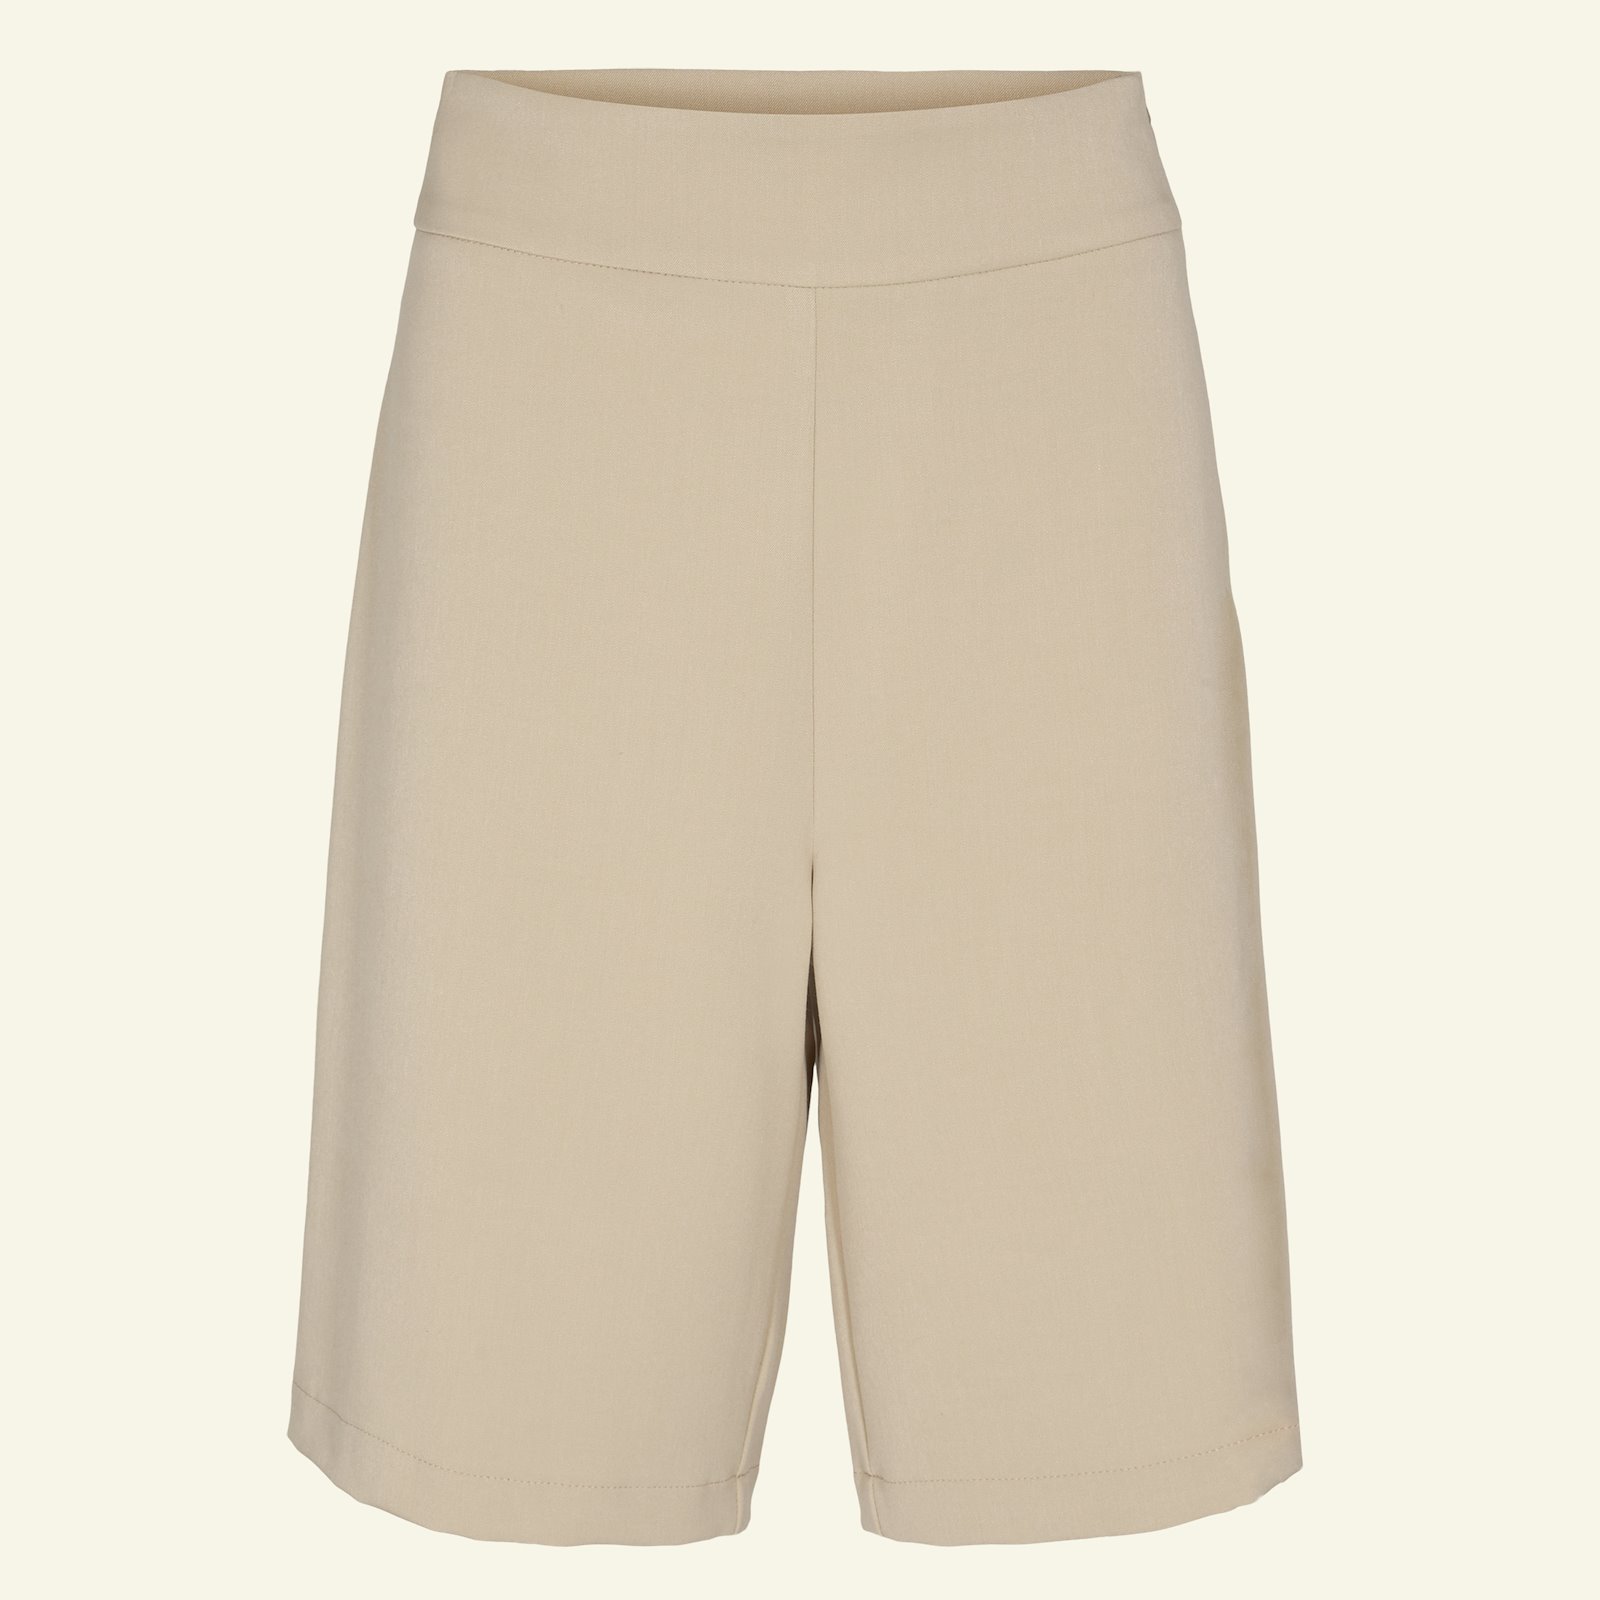 Highwaist and wide legs trousers, 46/18 p20052_460857_sskit